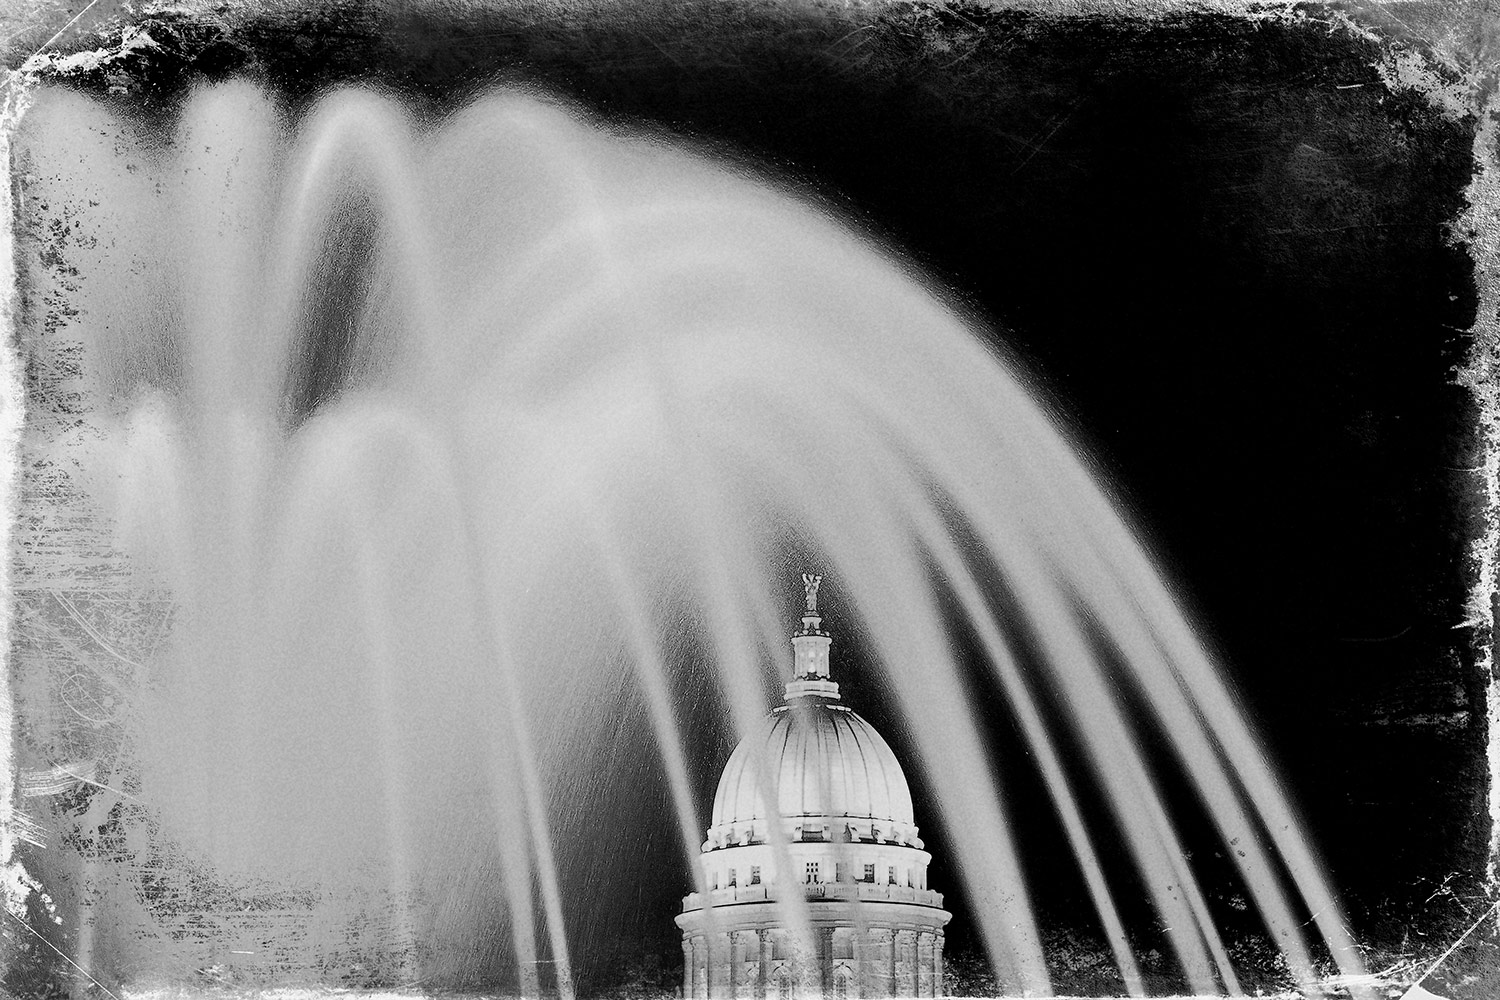 An old fashioned photo of the Wisconsin State Capitol in Madison, Wisconsin with a rough, stained look.&nbsp;→ Buy a Print